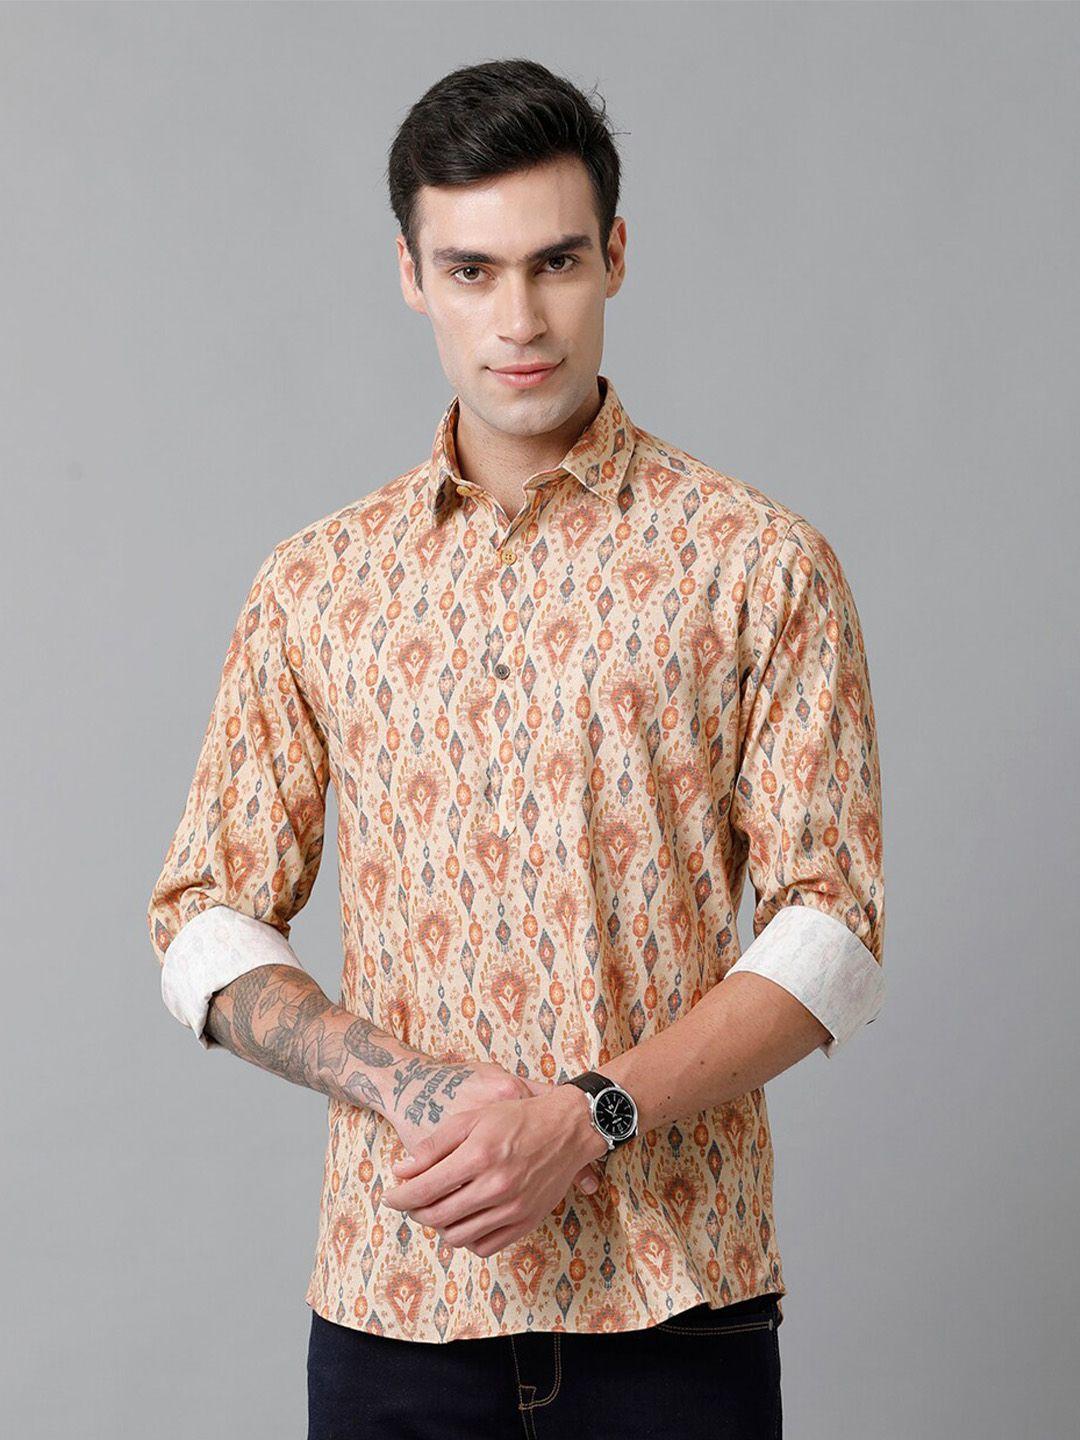 cavallo by linen club contemporary slim fit floral printed cotton linen casual shirt